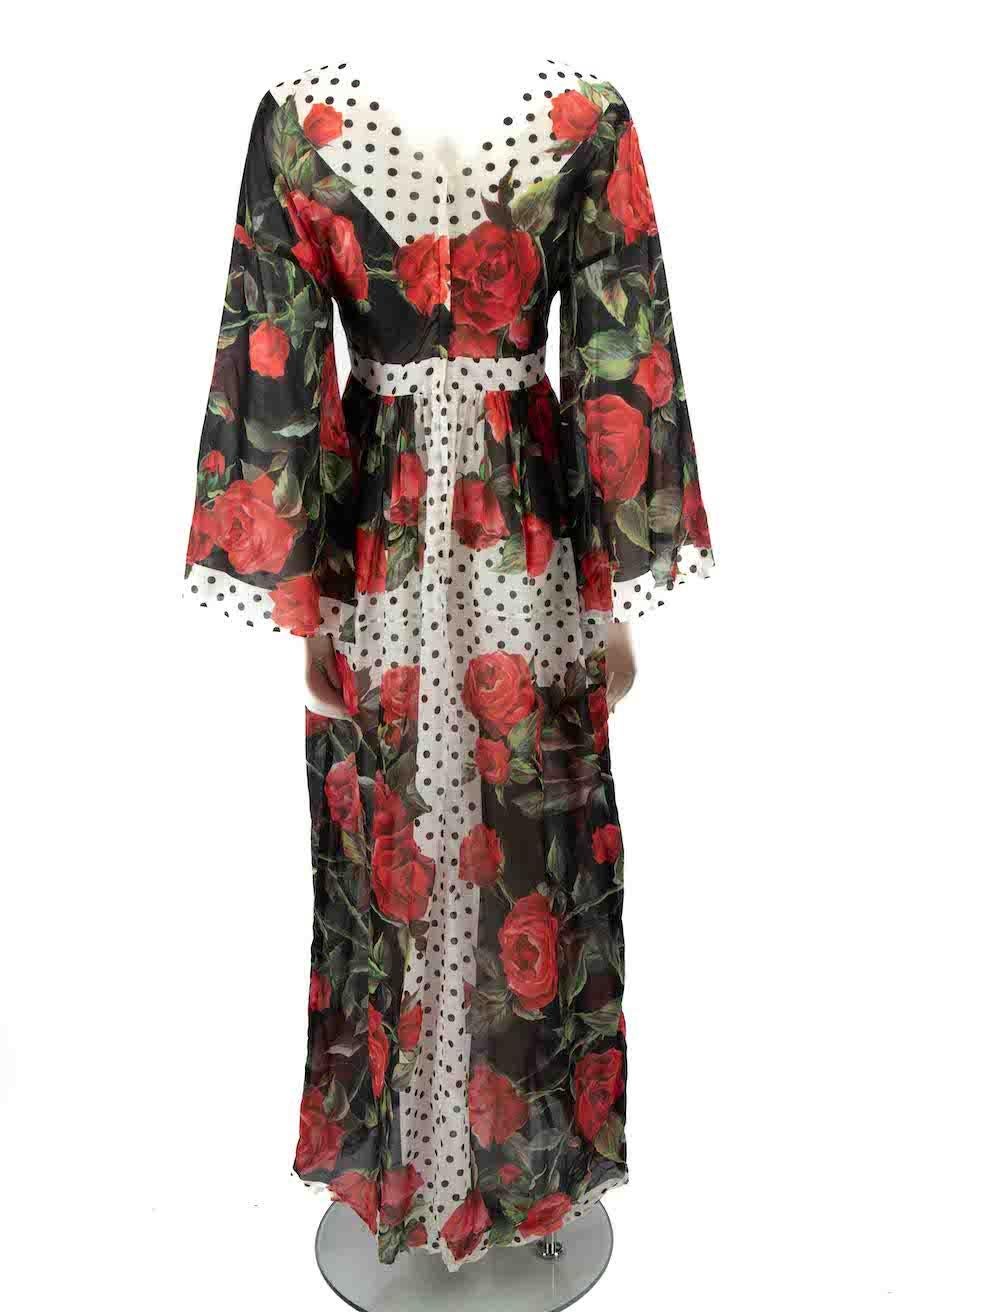 Dolce & Gabbana Floral & Polkadot Print Maxi Dress Size XS In Excellent Condition For Sale In London, GB